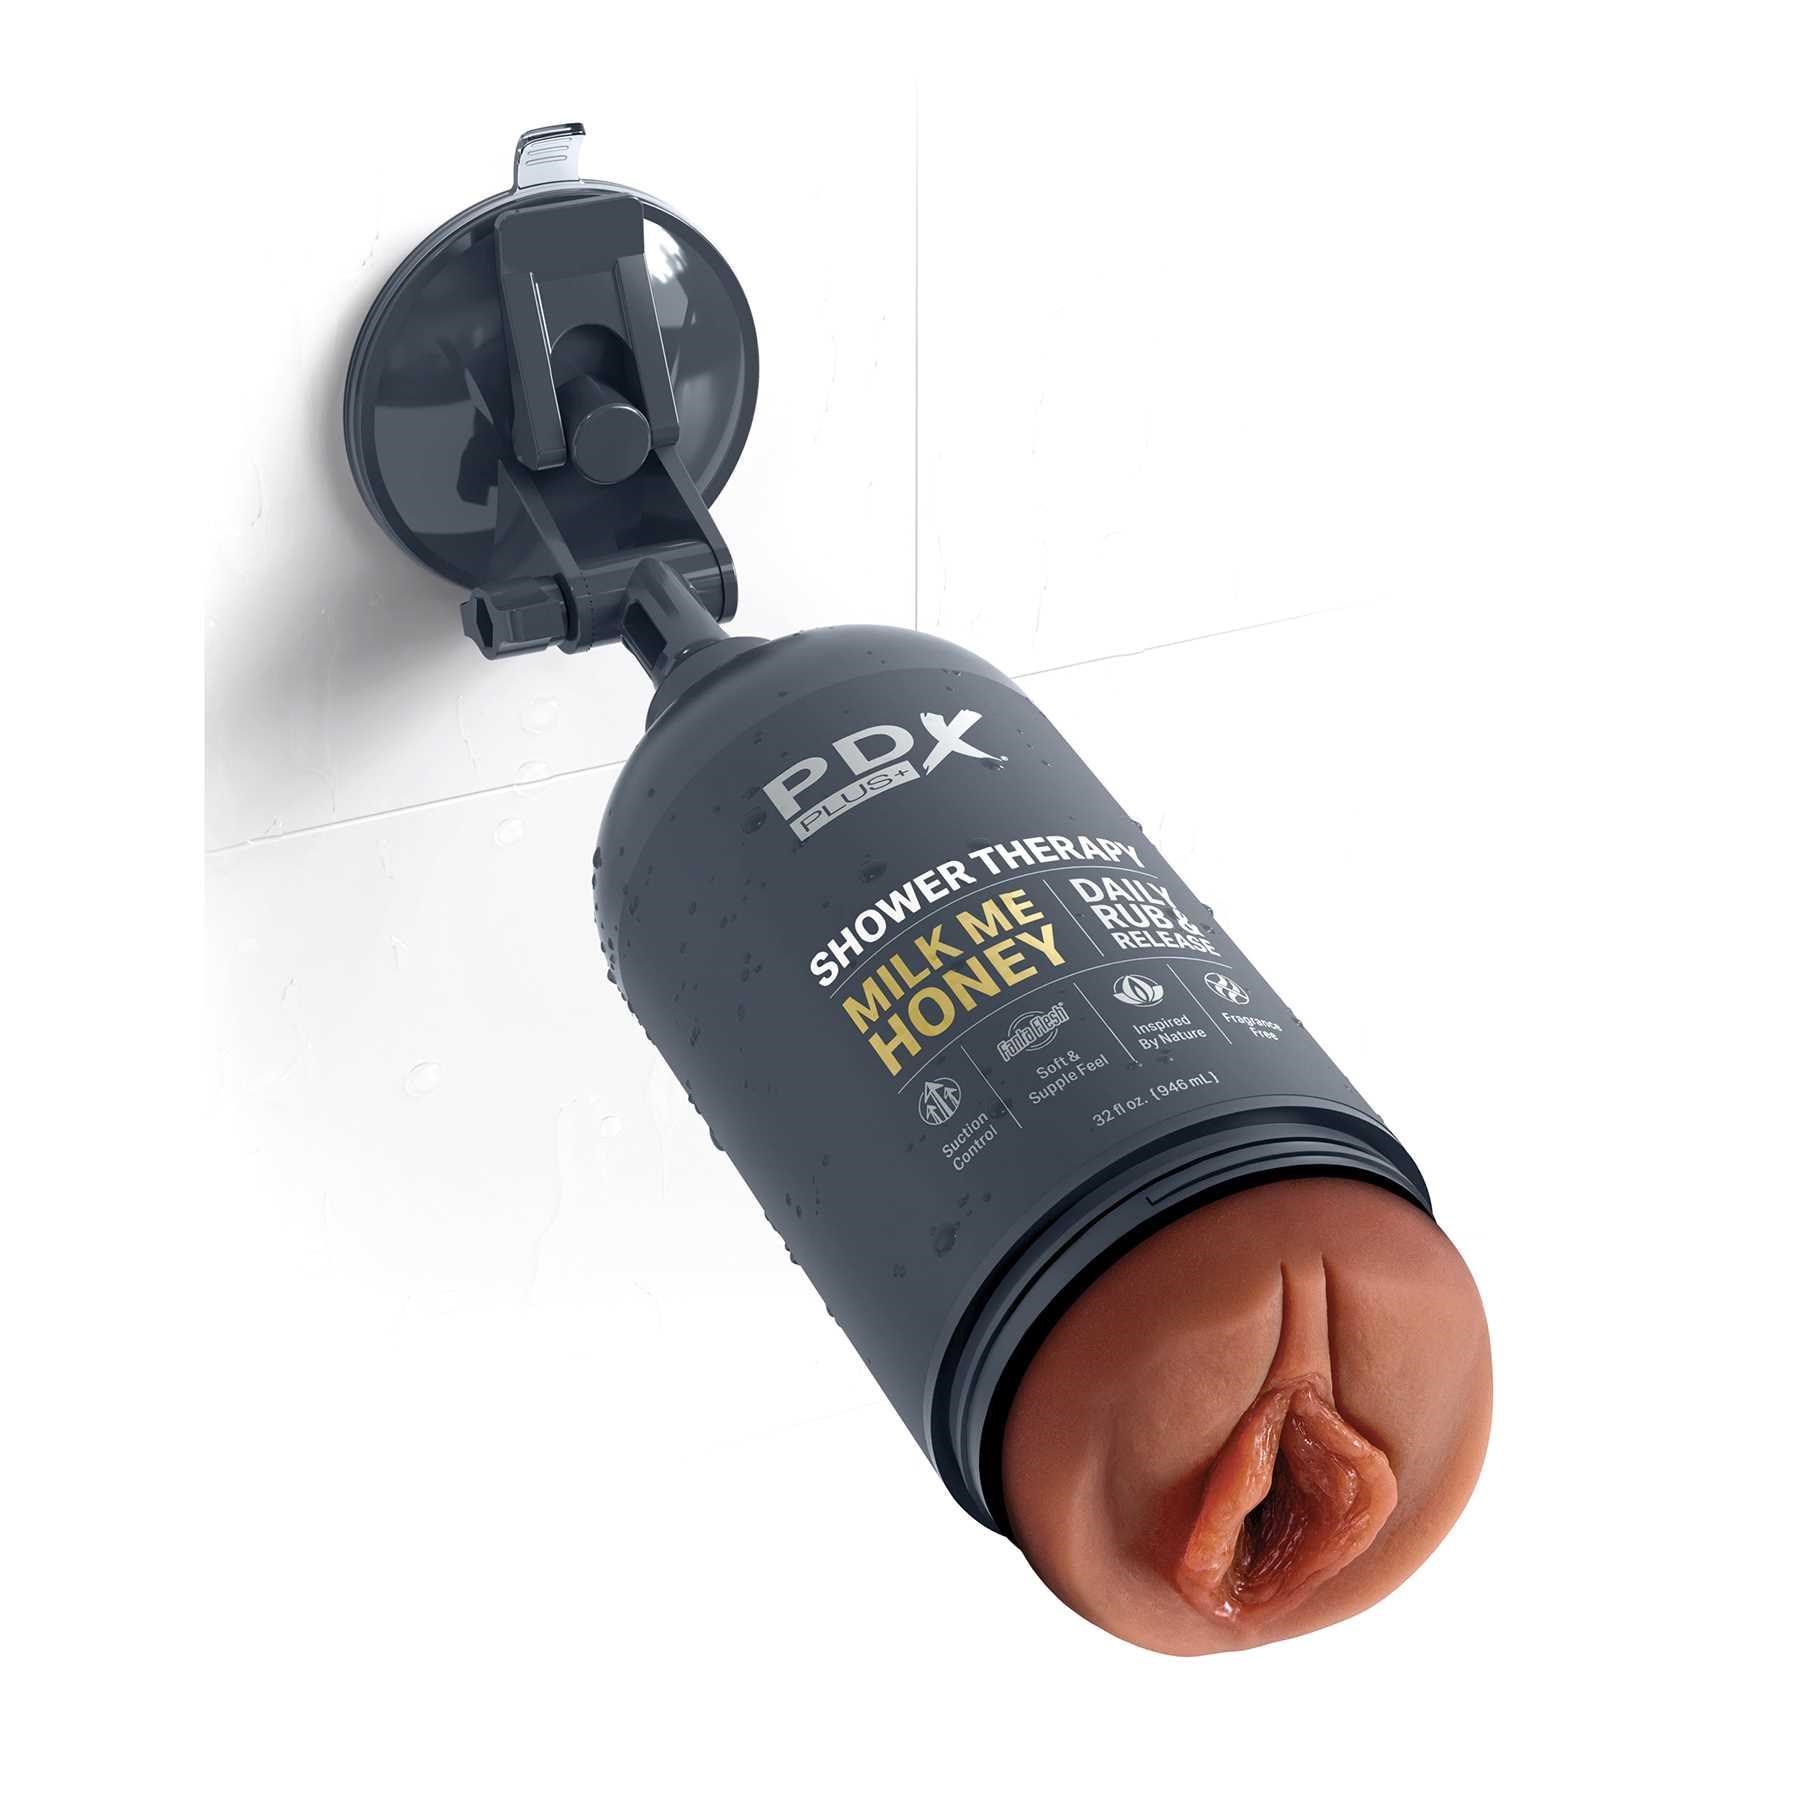 PDX Plus Shower Therapy Milk Me Honey Discreet Stroker brown with mount attached